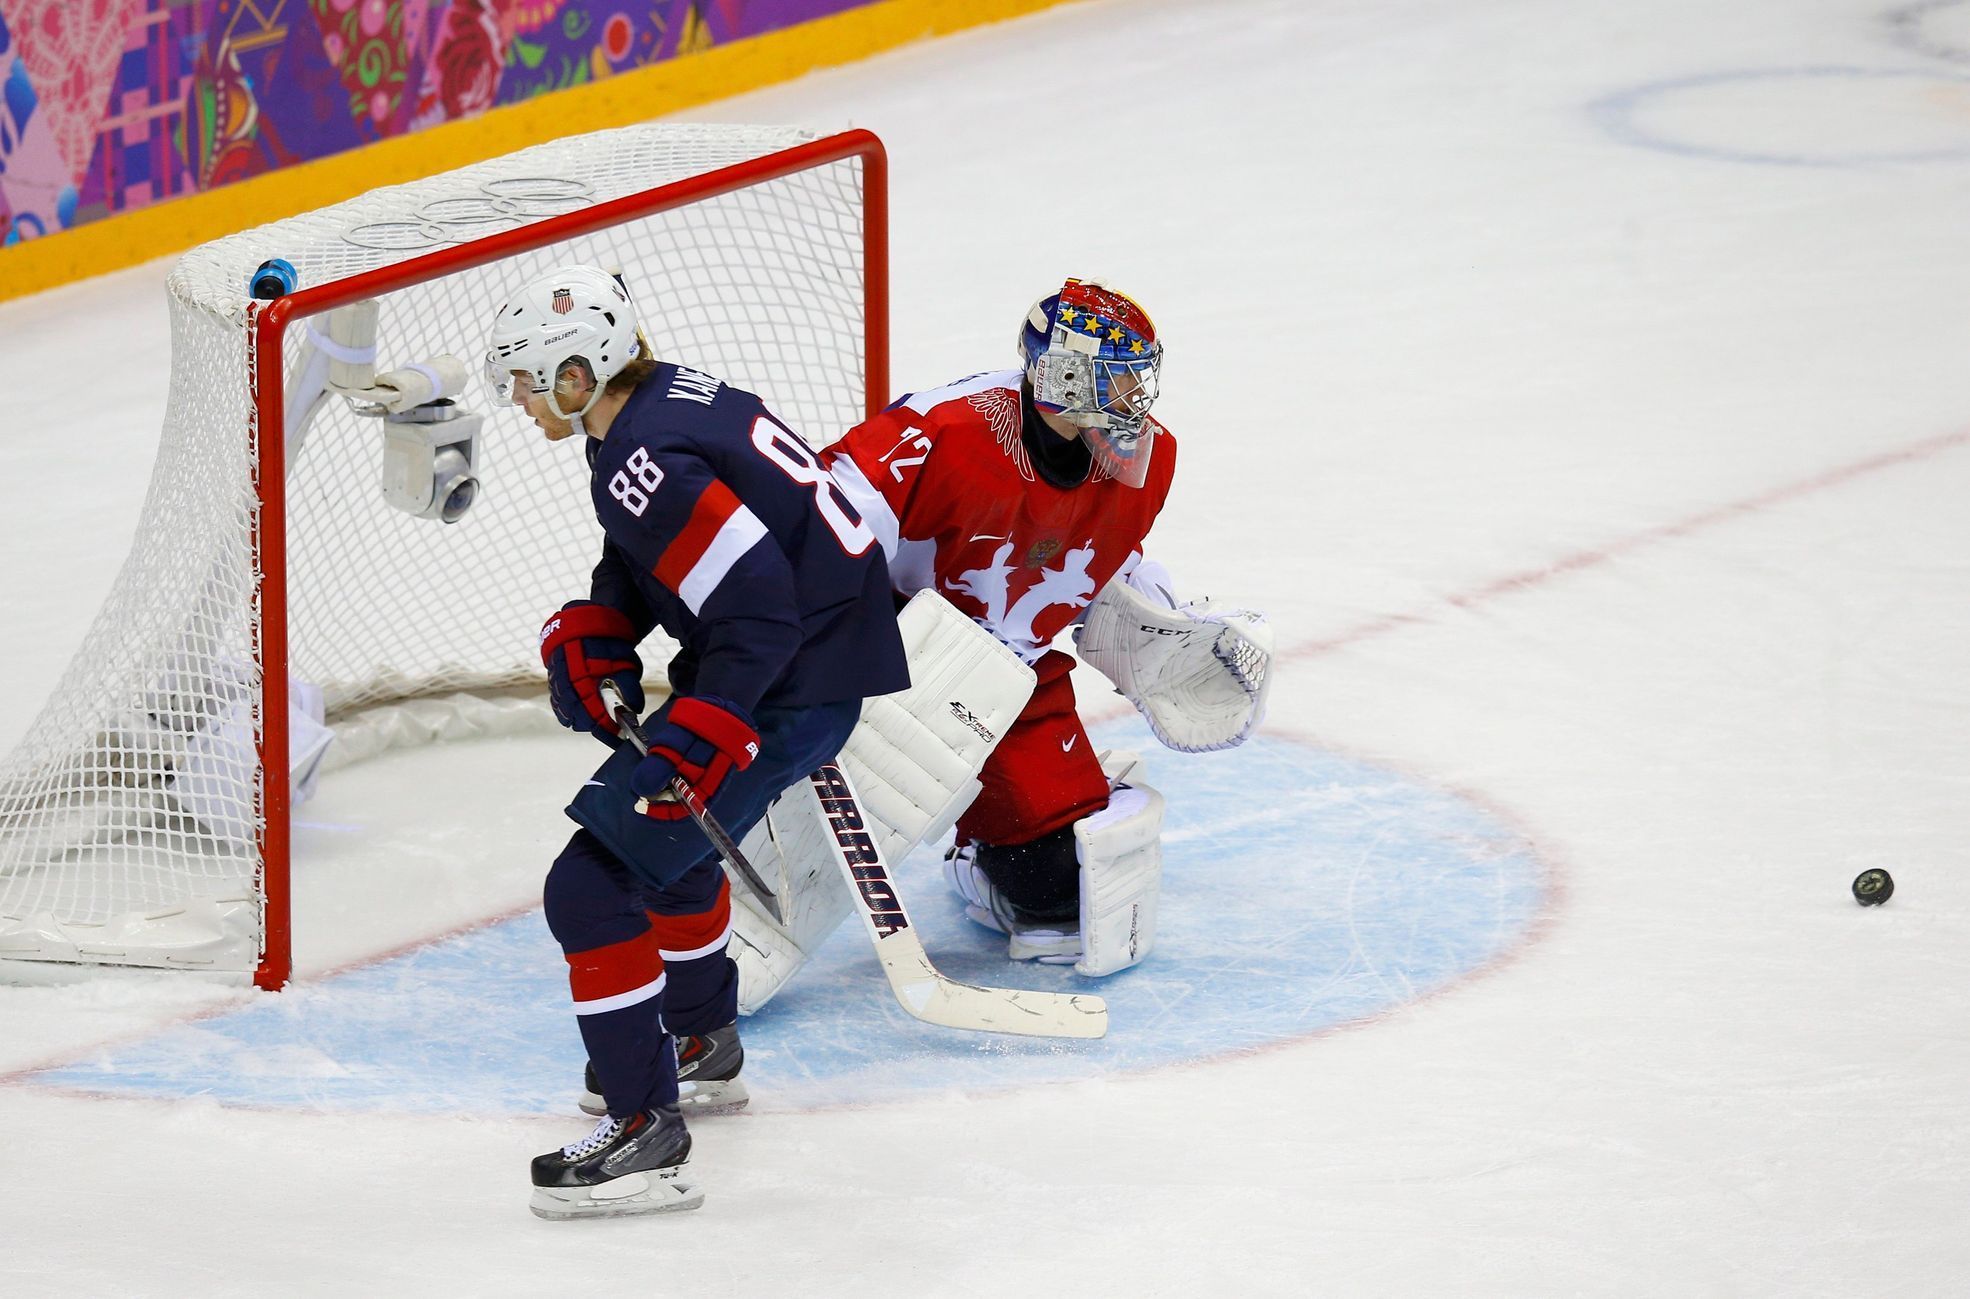 Russia's goalie Bobrovski makes a save on a breakaway by Team USA's Kane during overtime in their men's preliminary round ice hockey game at the 2014 Sochi Winter Olympic Games